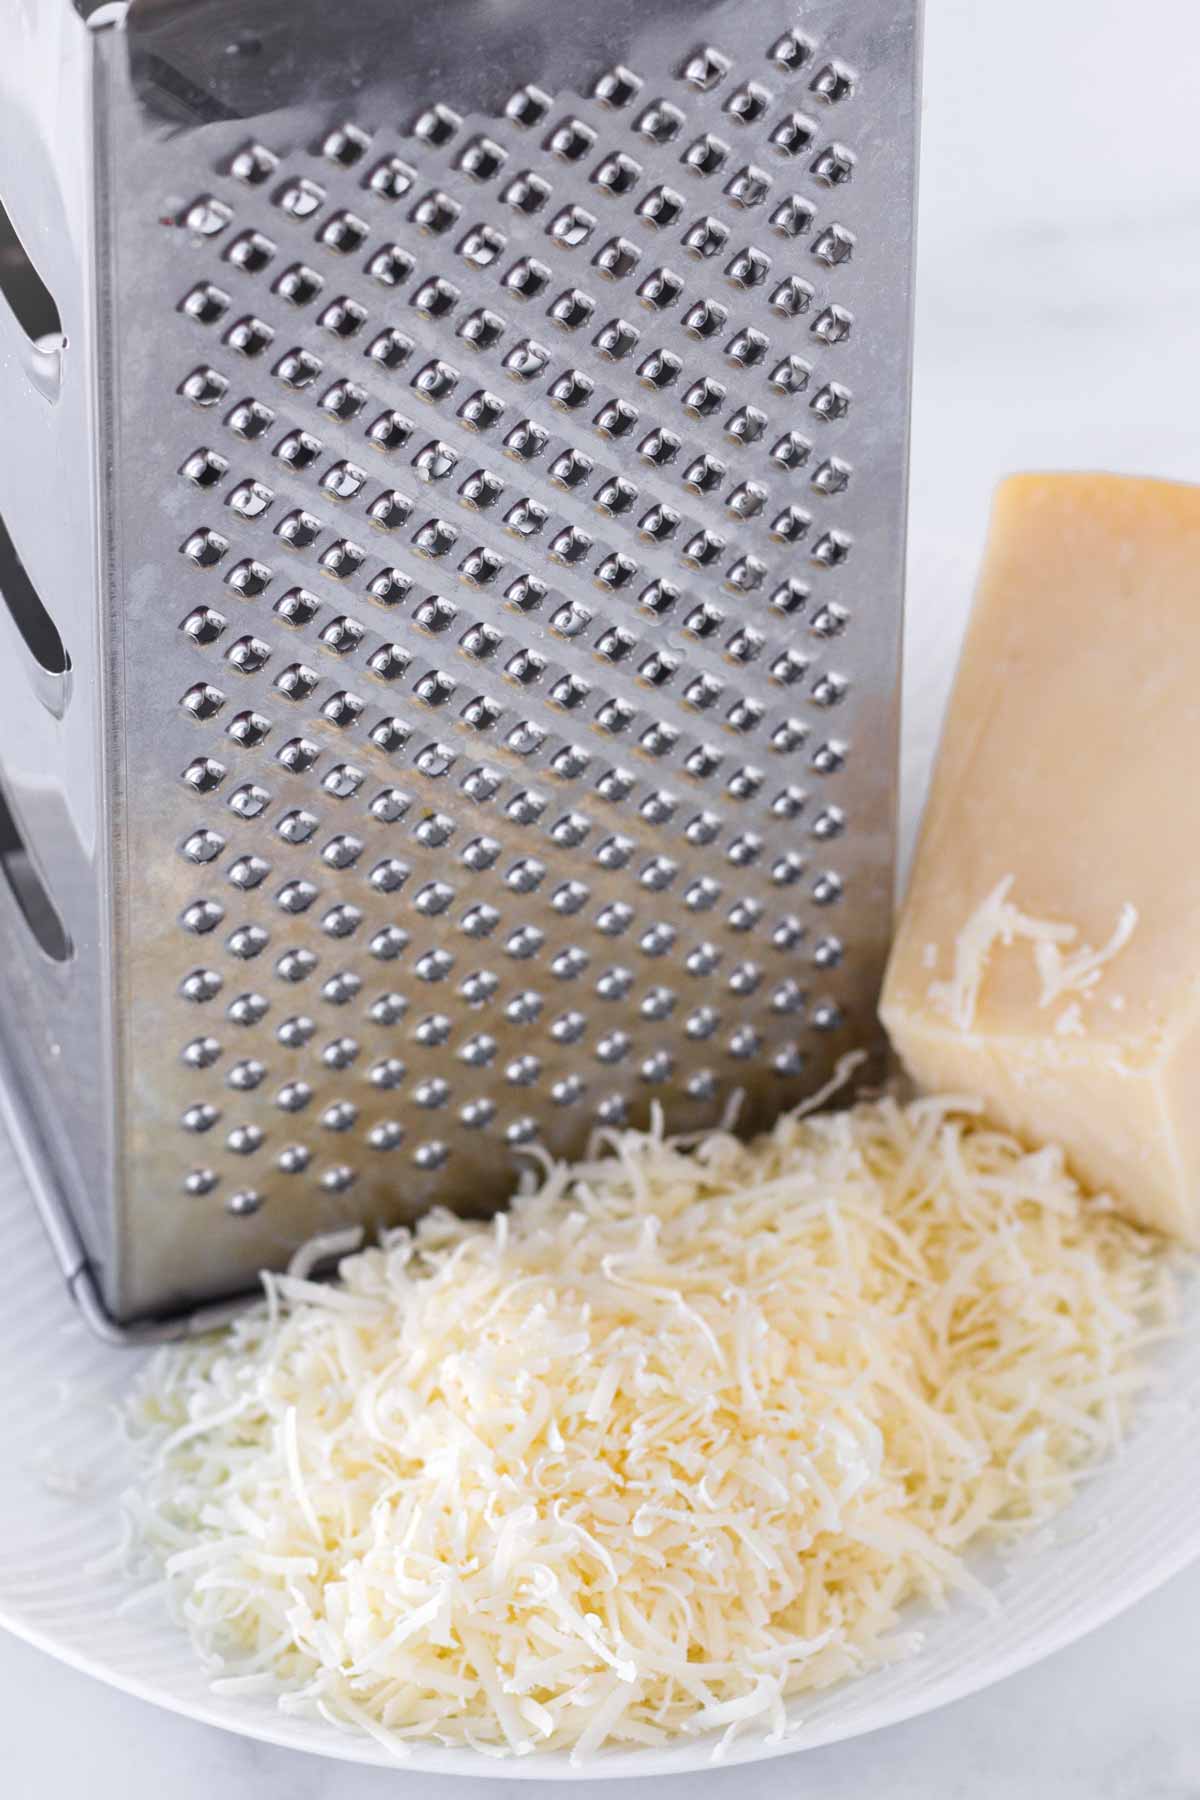 grated parmesan cheese next to a box grater